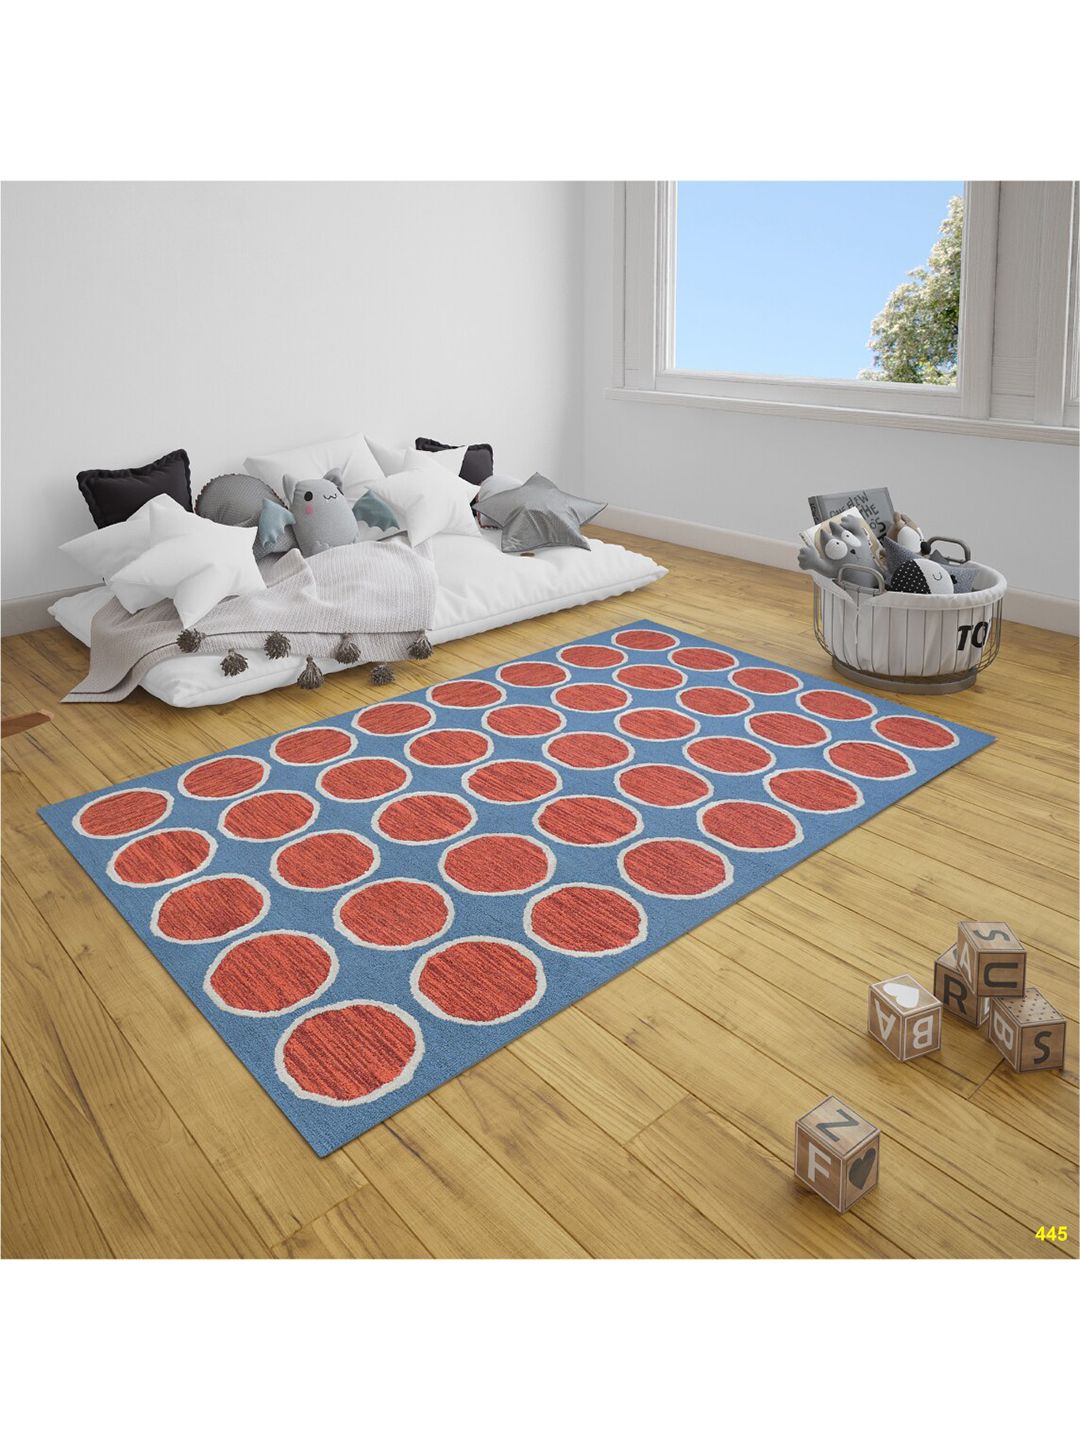 SANDED EDGE Red & Blue Geometric Printed Rectangular Wool Carpets Price in India